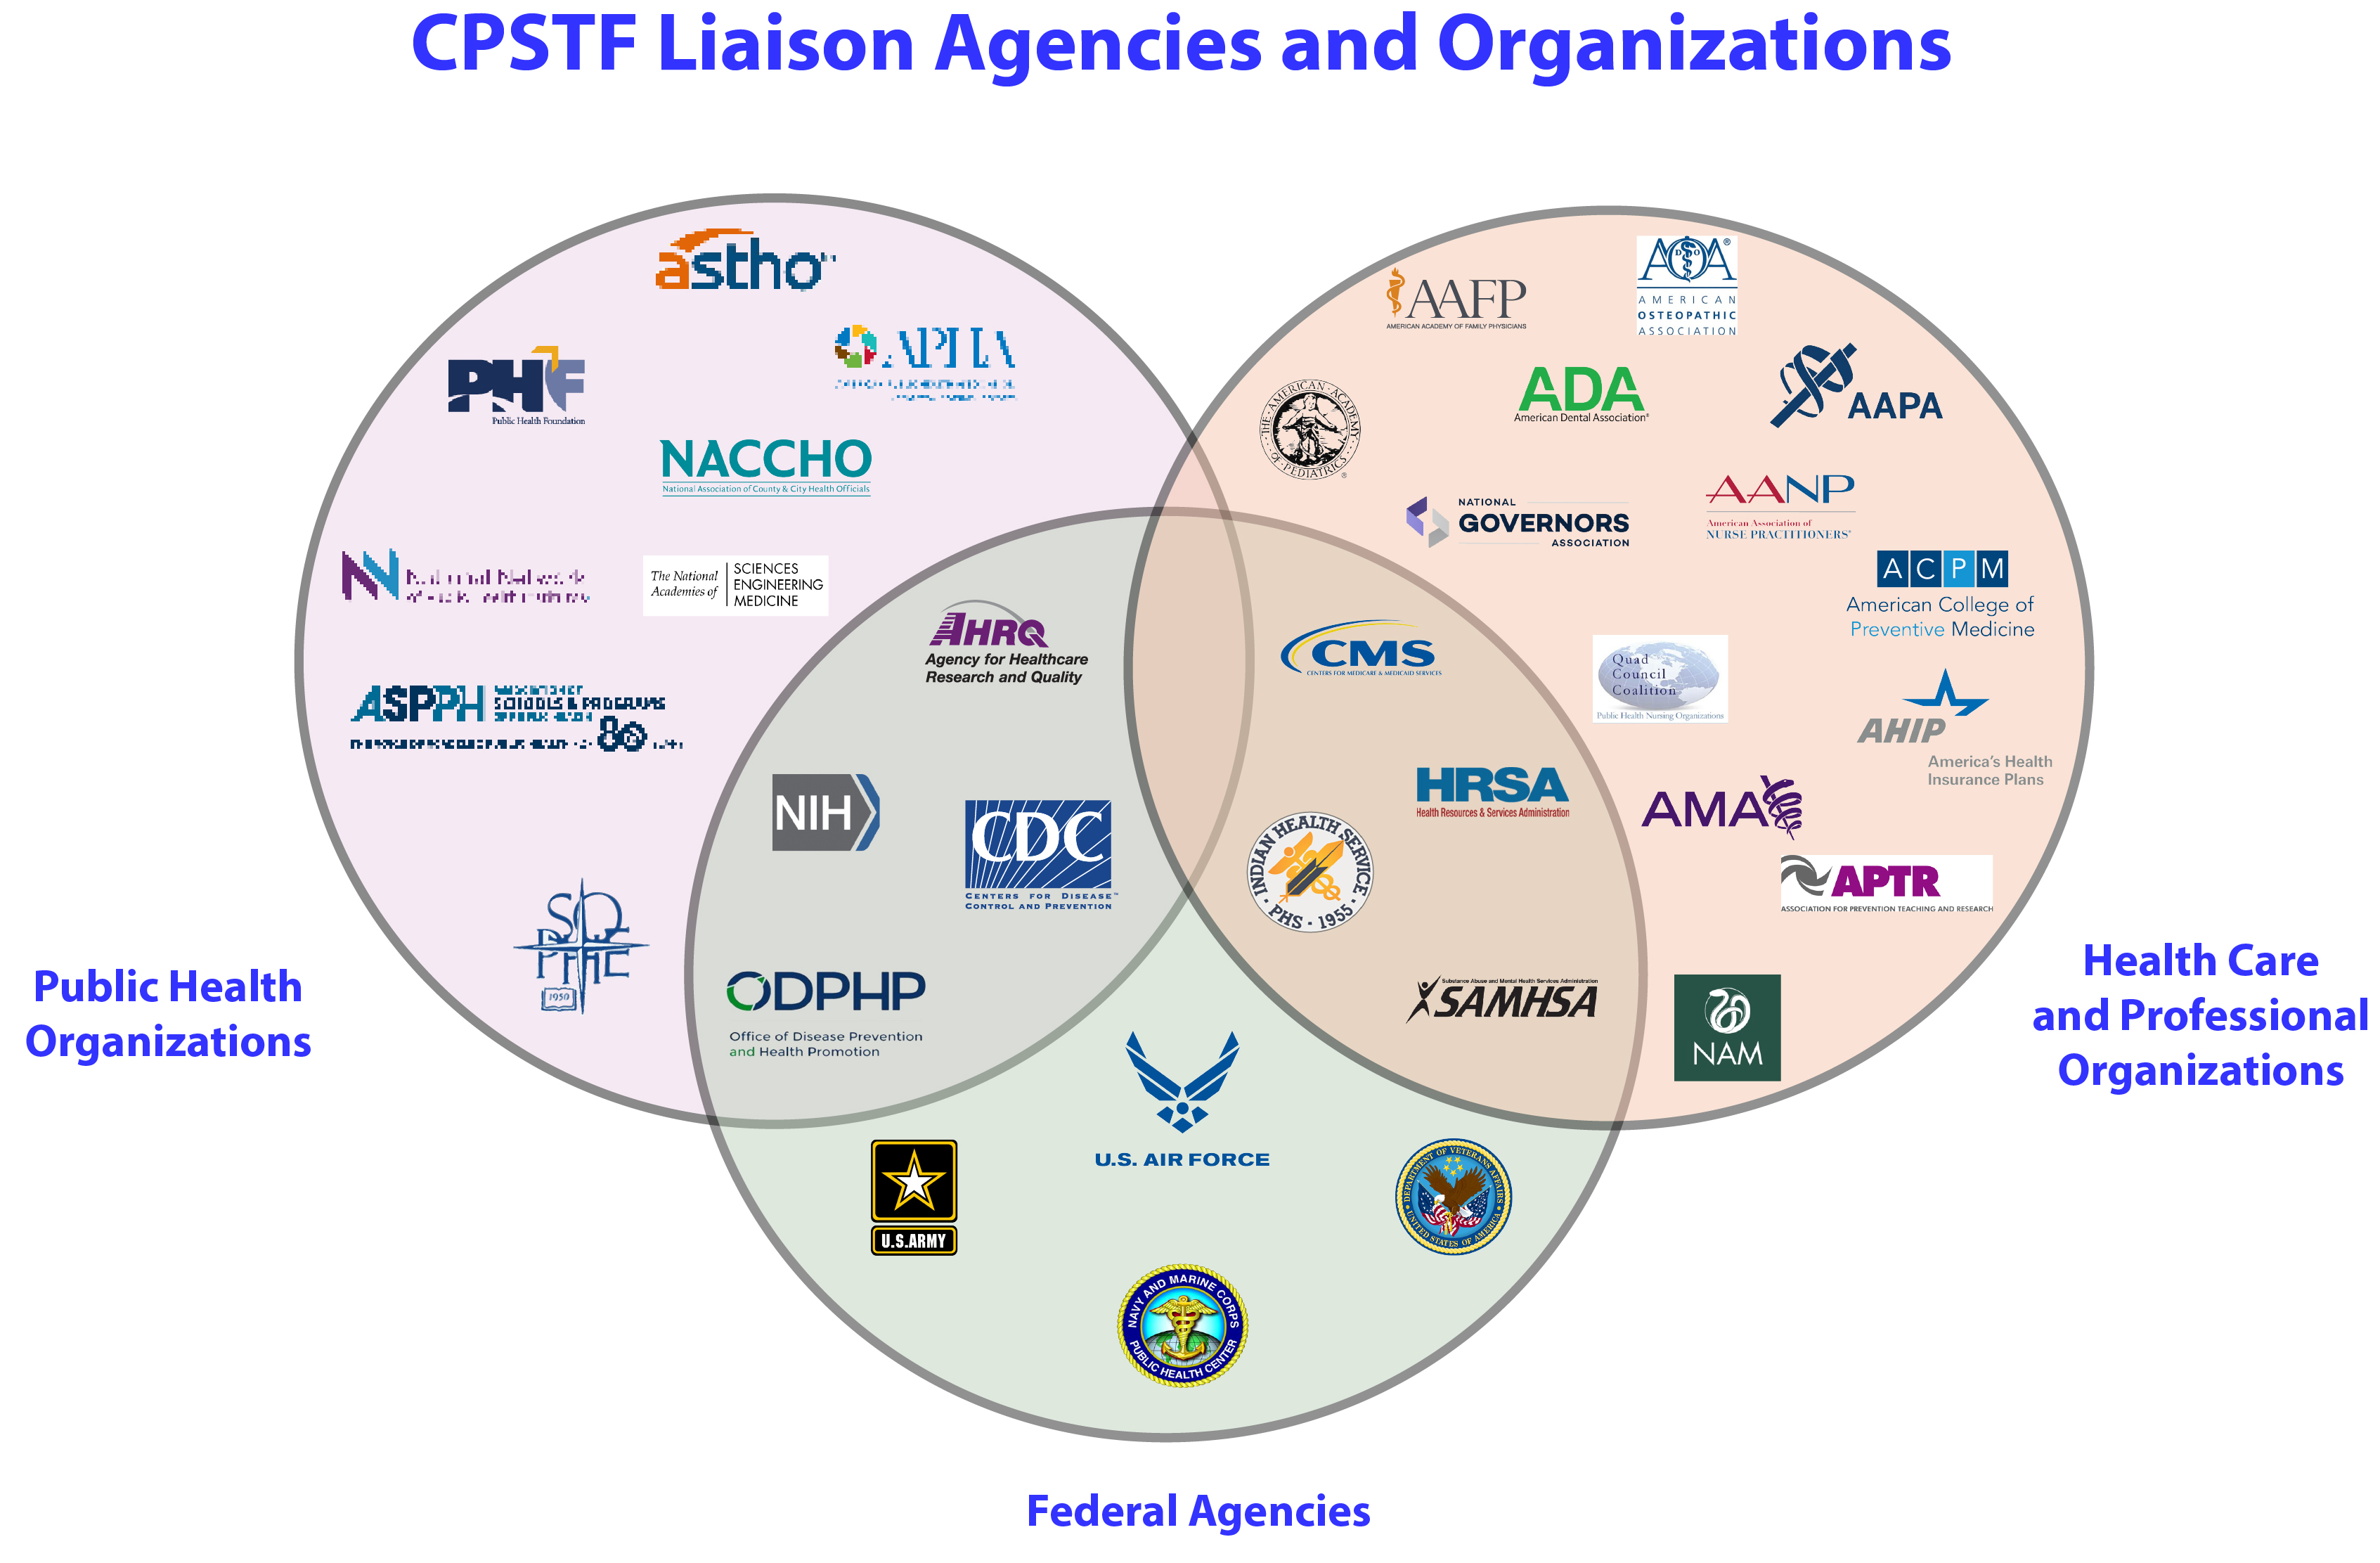 A Venn diagram showing the three major types of CPSTF liaison organizations and where they overlap.